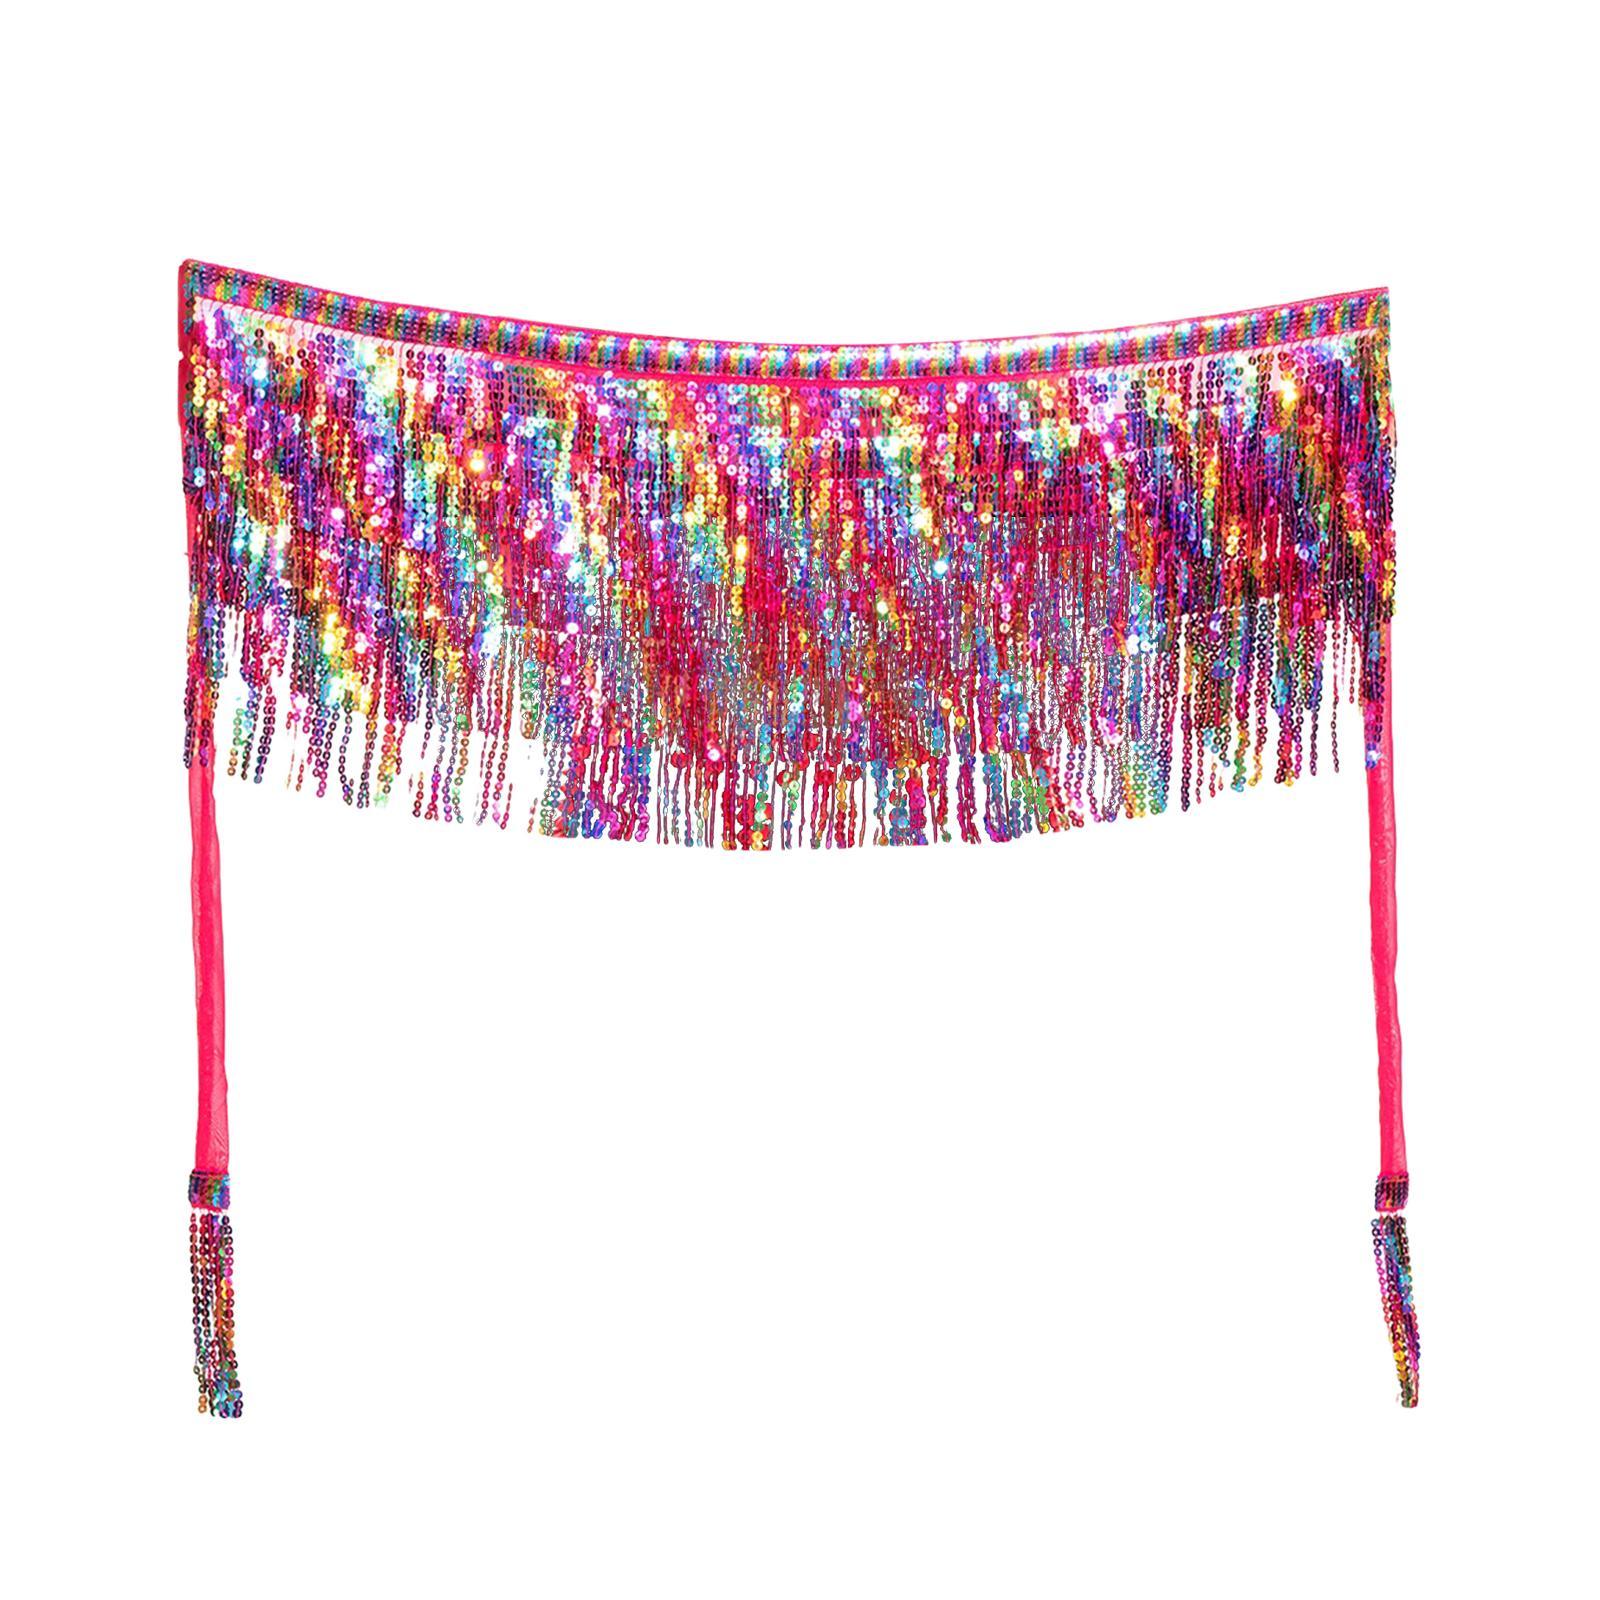 Belly Dance Hip Scarf Sequin Skirt for Beach Costume Accessories Cha Cha